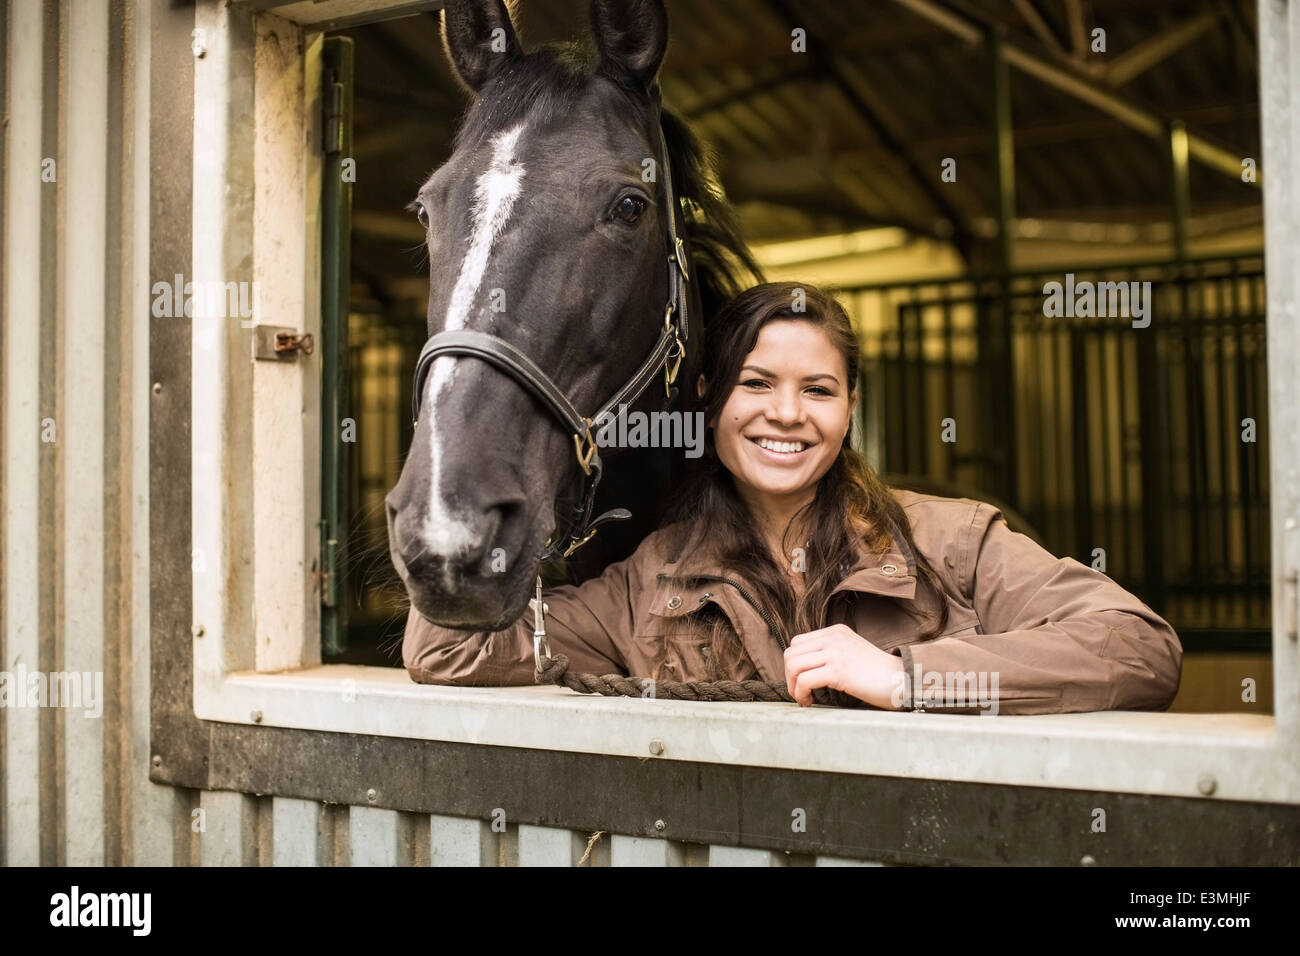 Portrait of happy young woman with horse in stable Stock Photo